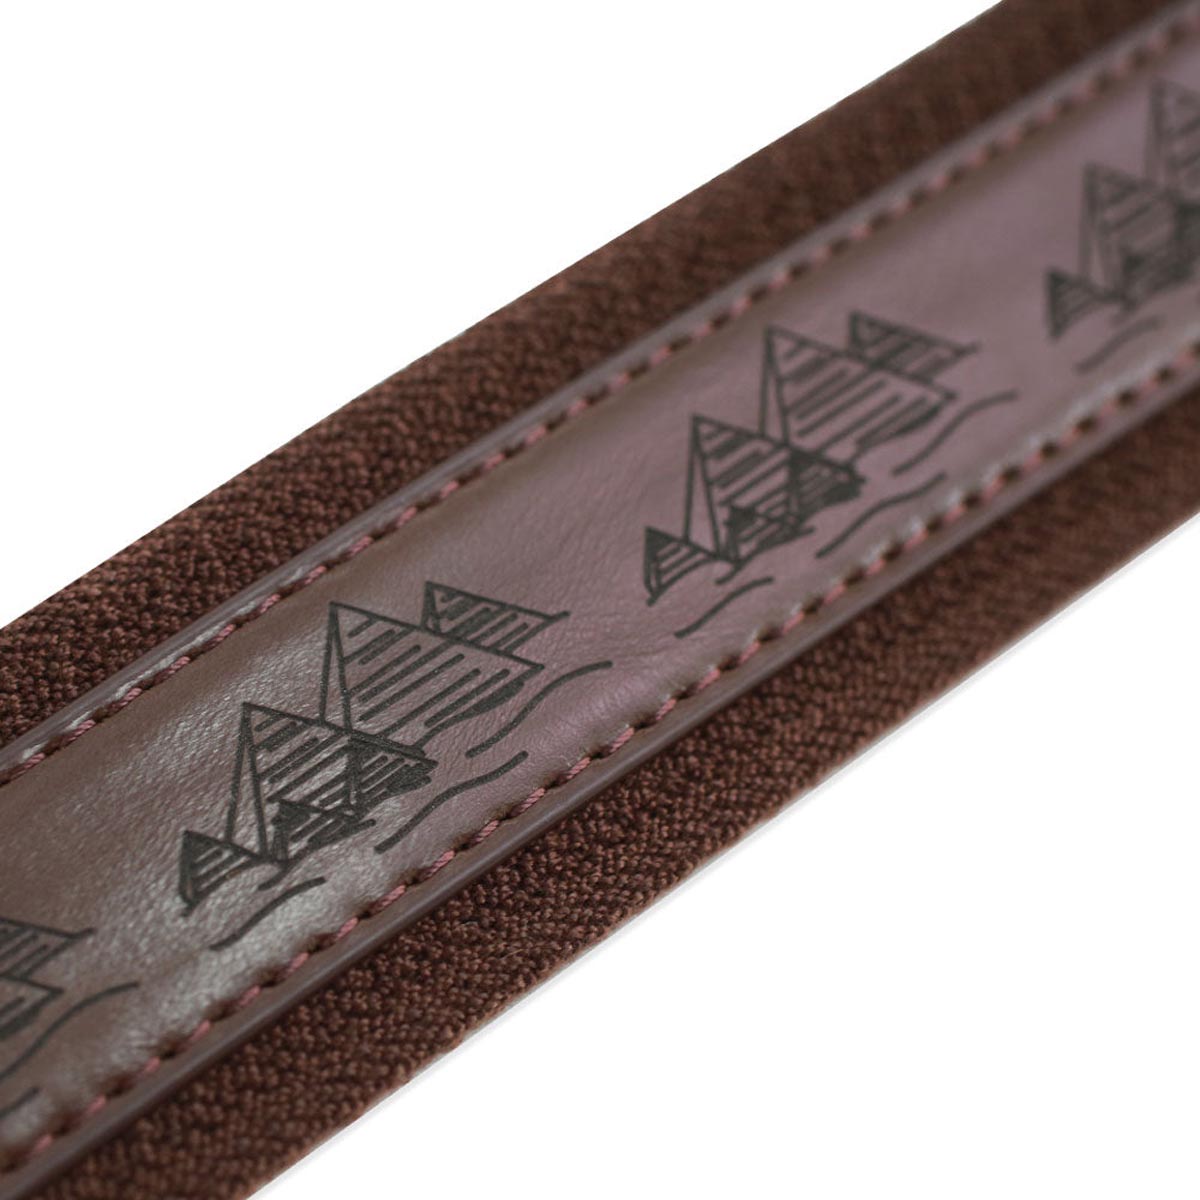 Theories As Above Vegan Leather Belt - Brown image 2